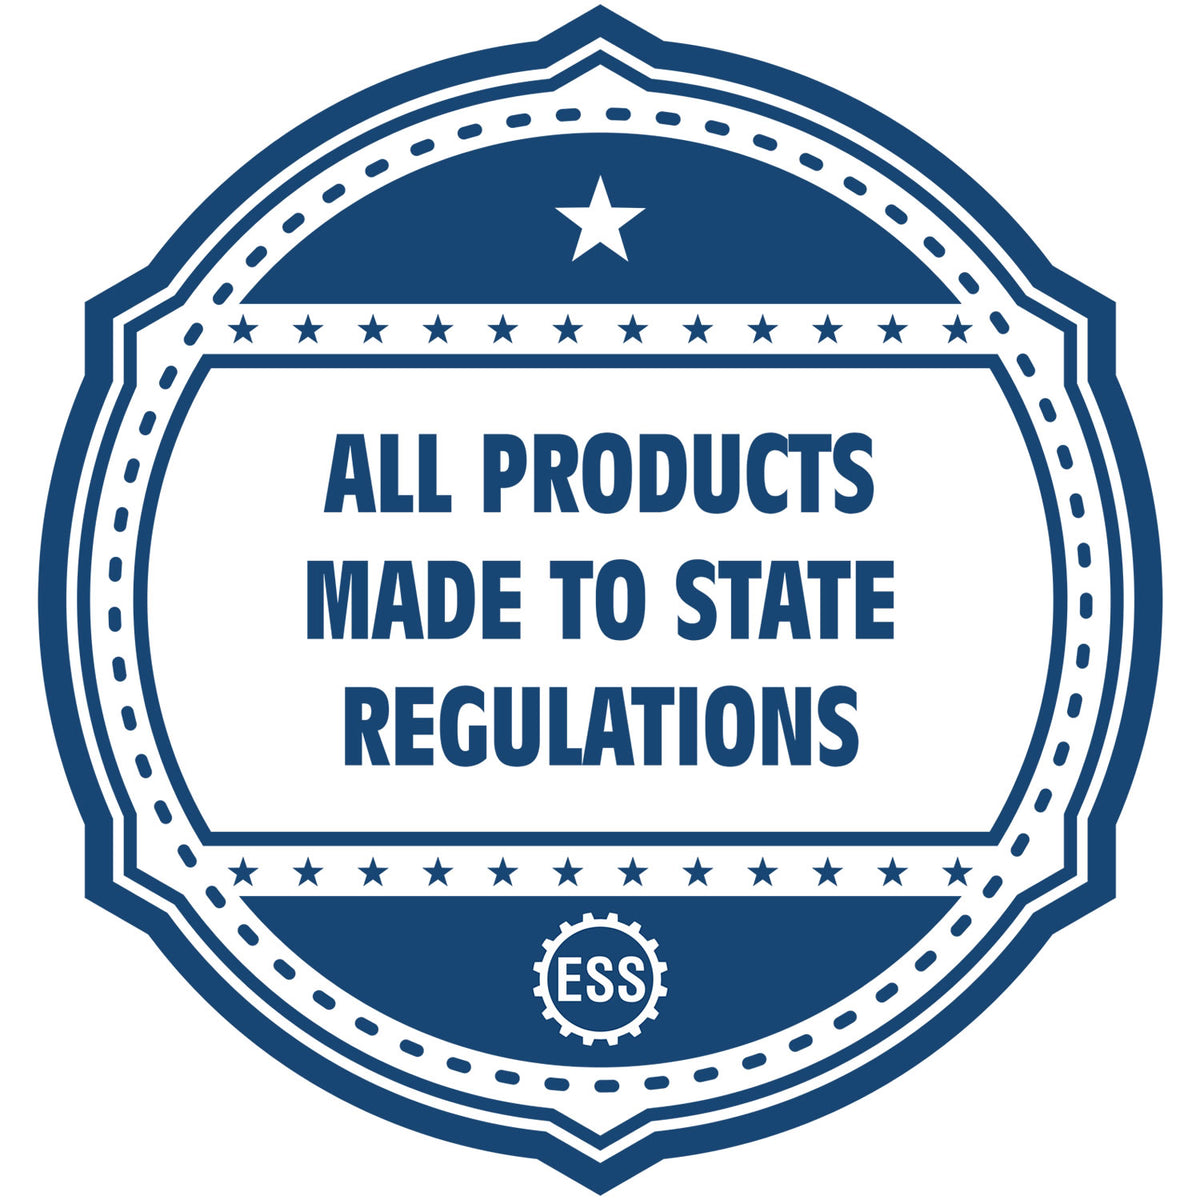 An icon or badge element for the State of Texas Soft Land Surveyor Embossing Seal showing that this product is made in compliance with state regulations.